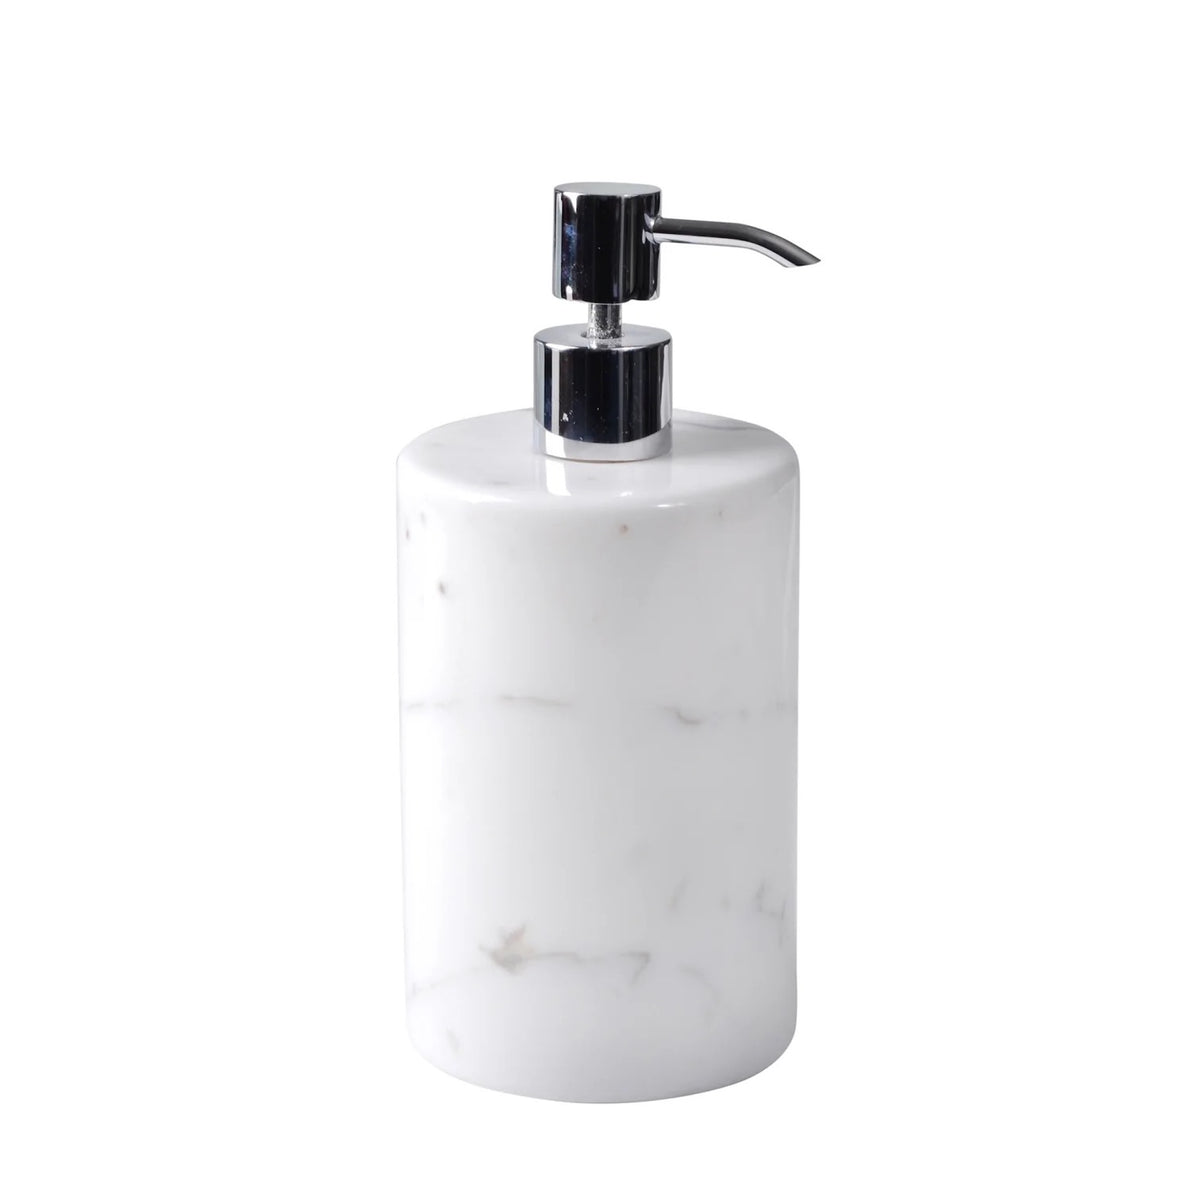 Mike and Ally Statuario Marble Bath Accessories Lotion Pump